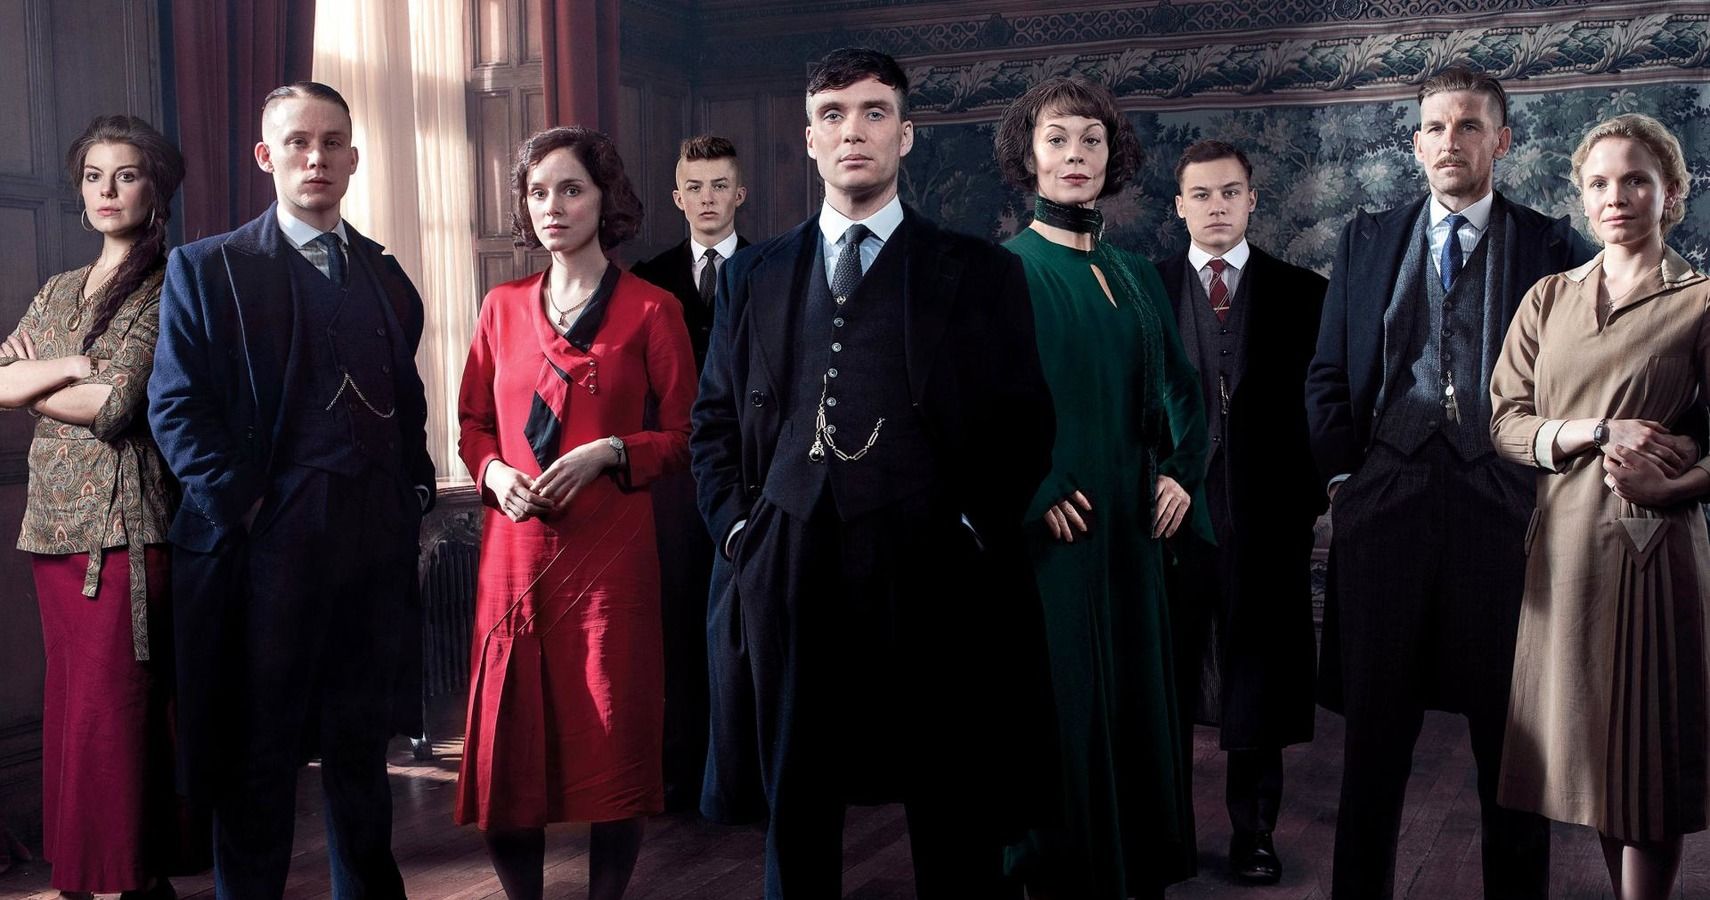 Peaky Blinders: 10 Hidden Details About The Costumes You Didn't Notice